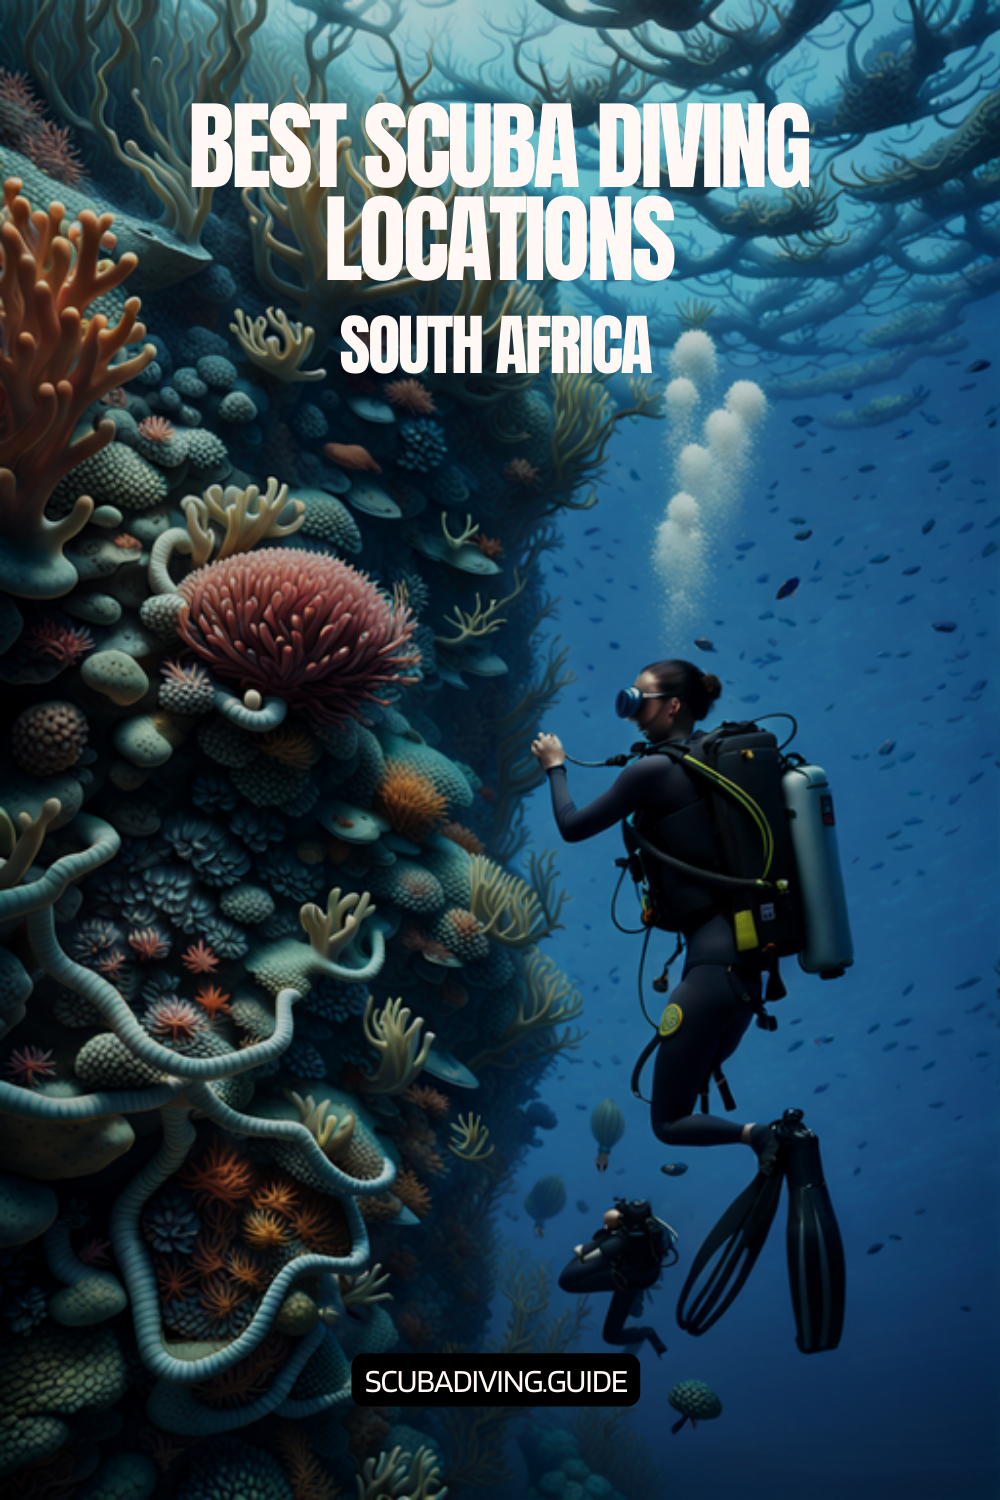 Scuba Diving Locations in South Africa